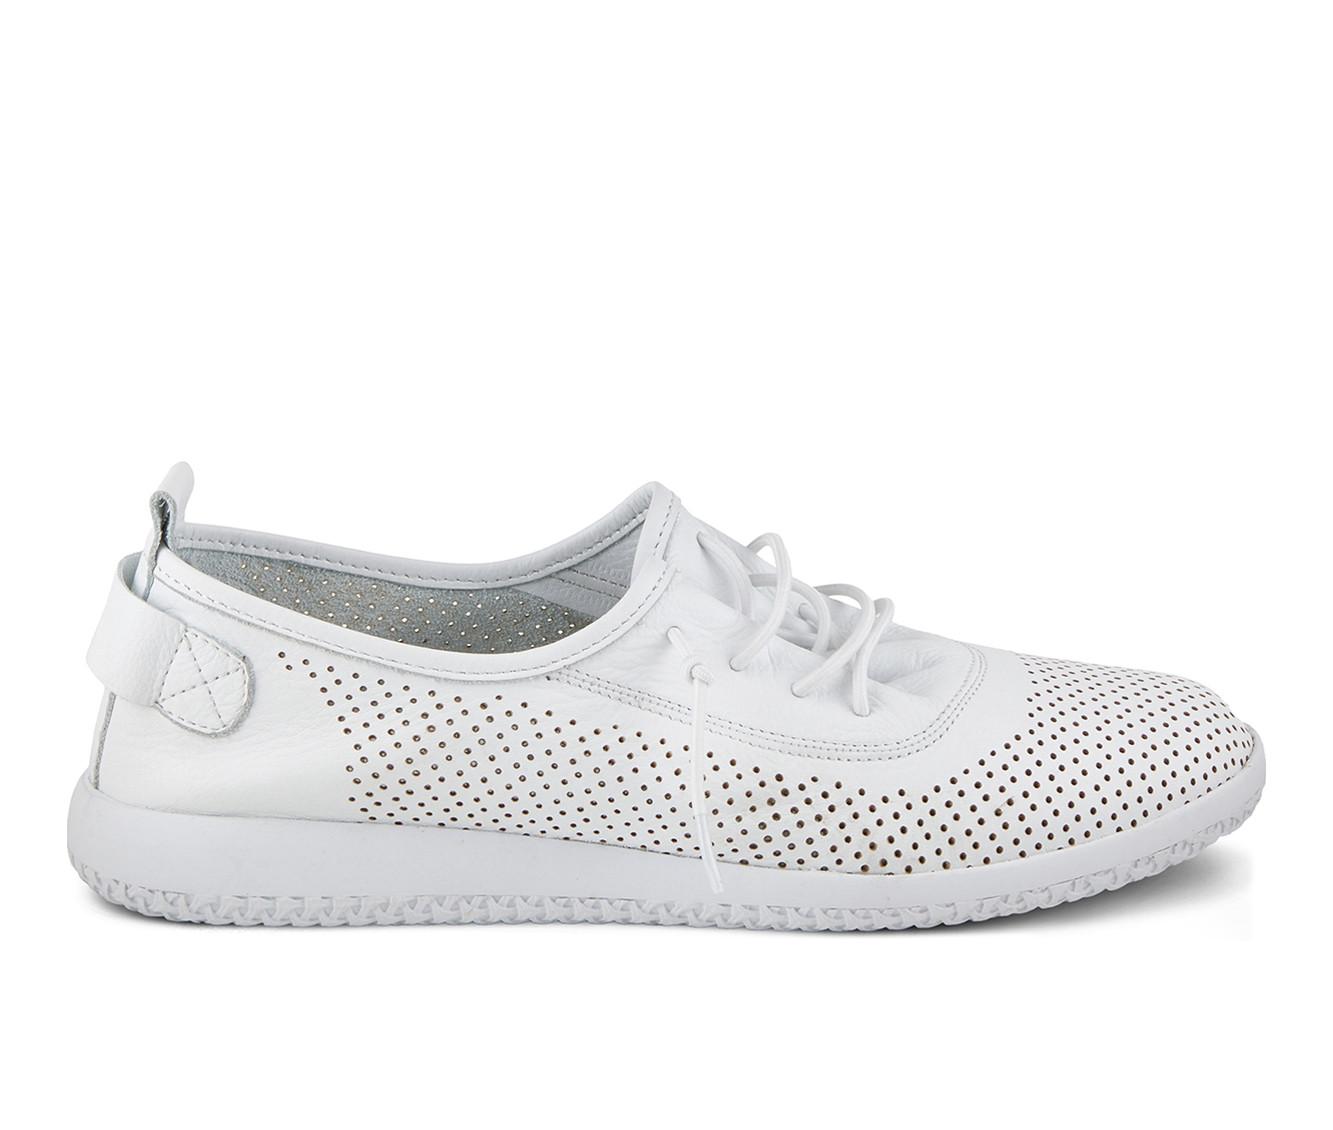 Women's SPRING STEP Skyharbor Casual Fashion Sneakers